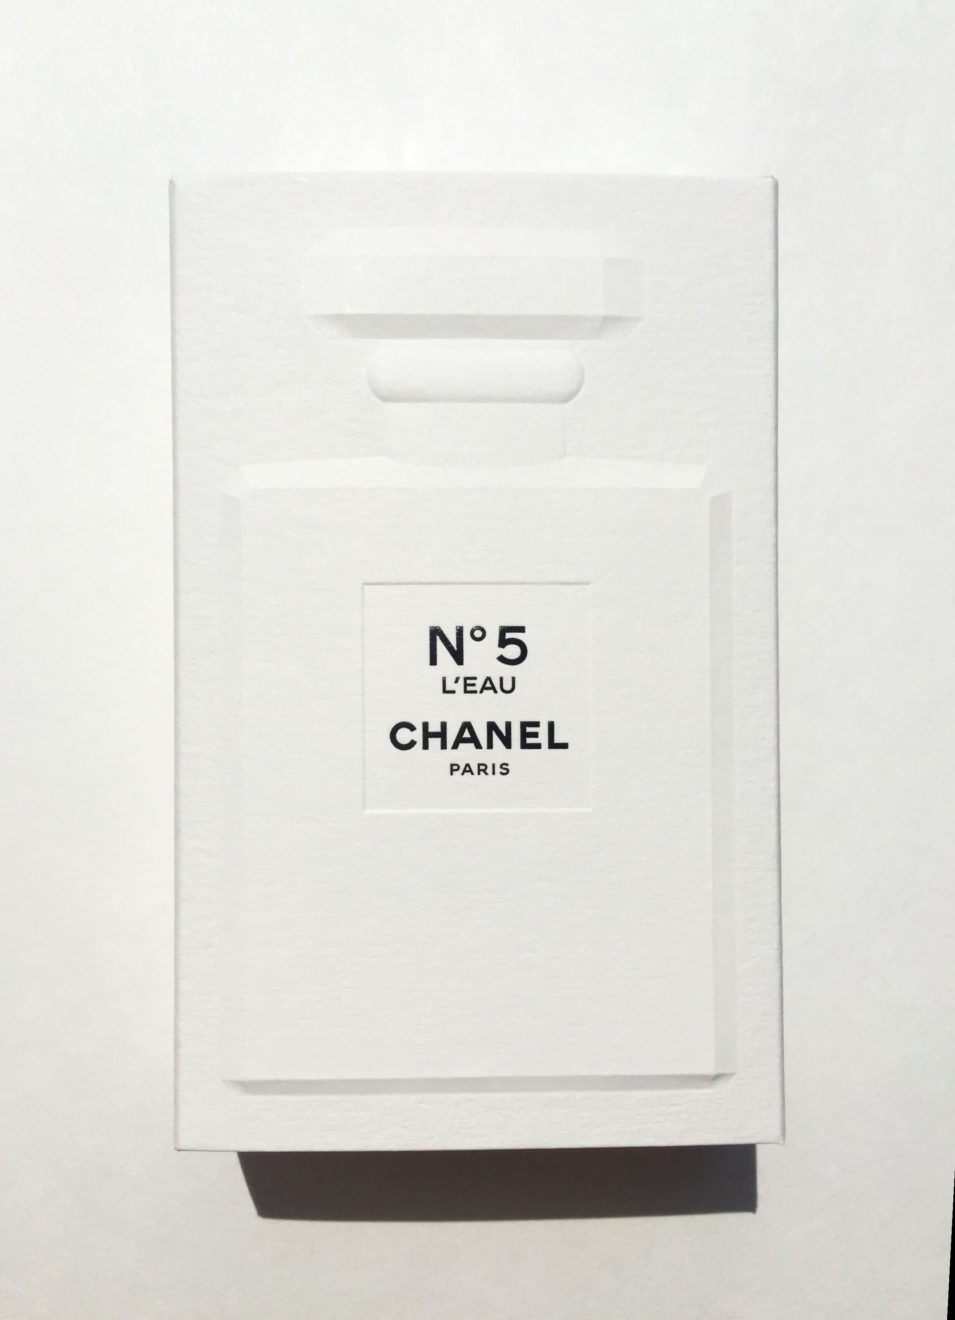 CHANEL_No5_L’EAU_packaging – DALY BEAUTY